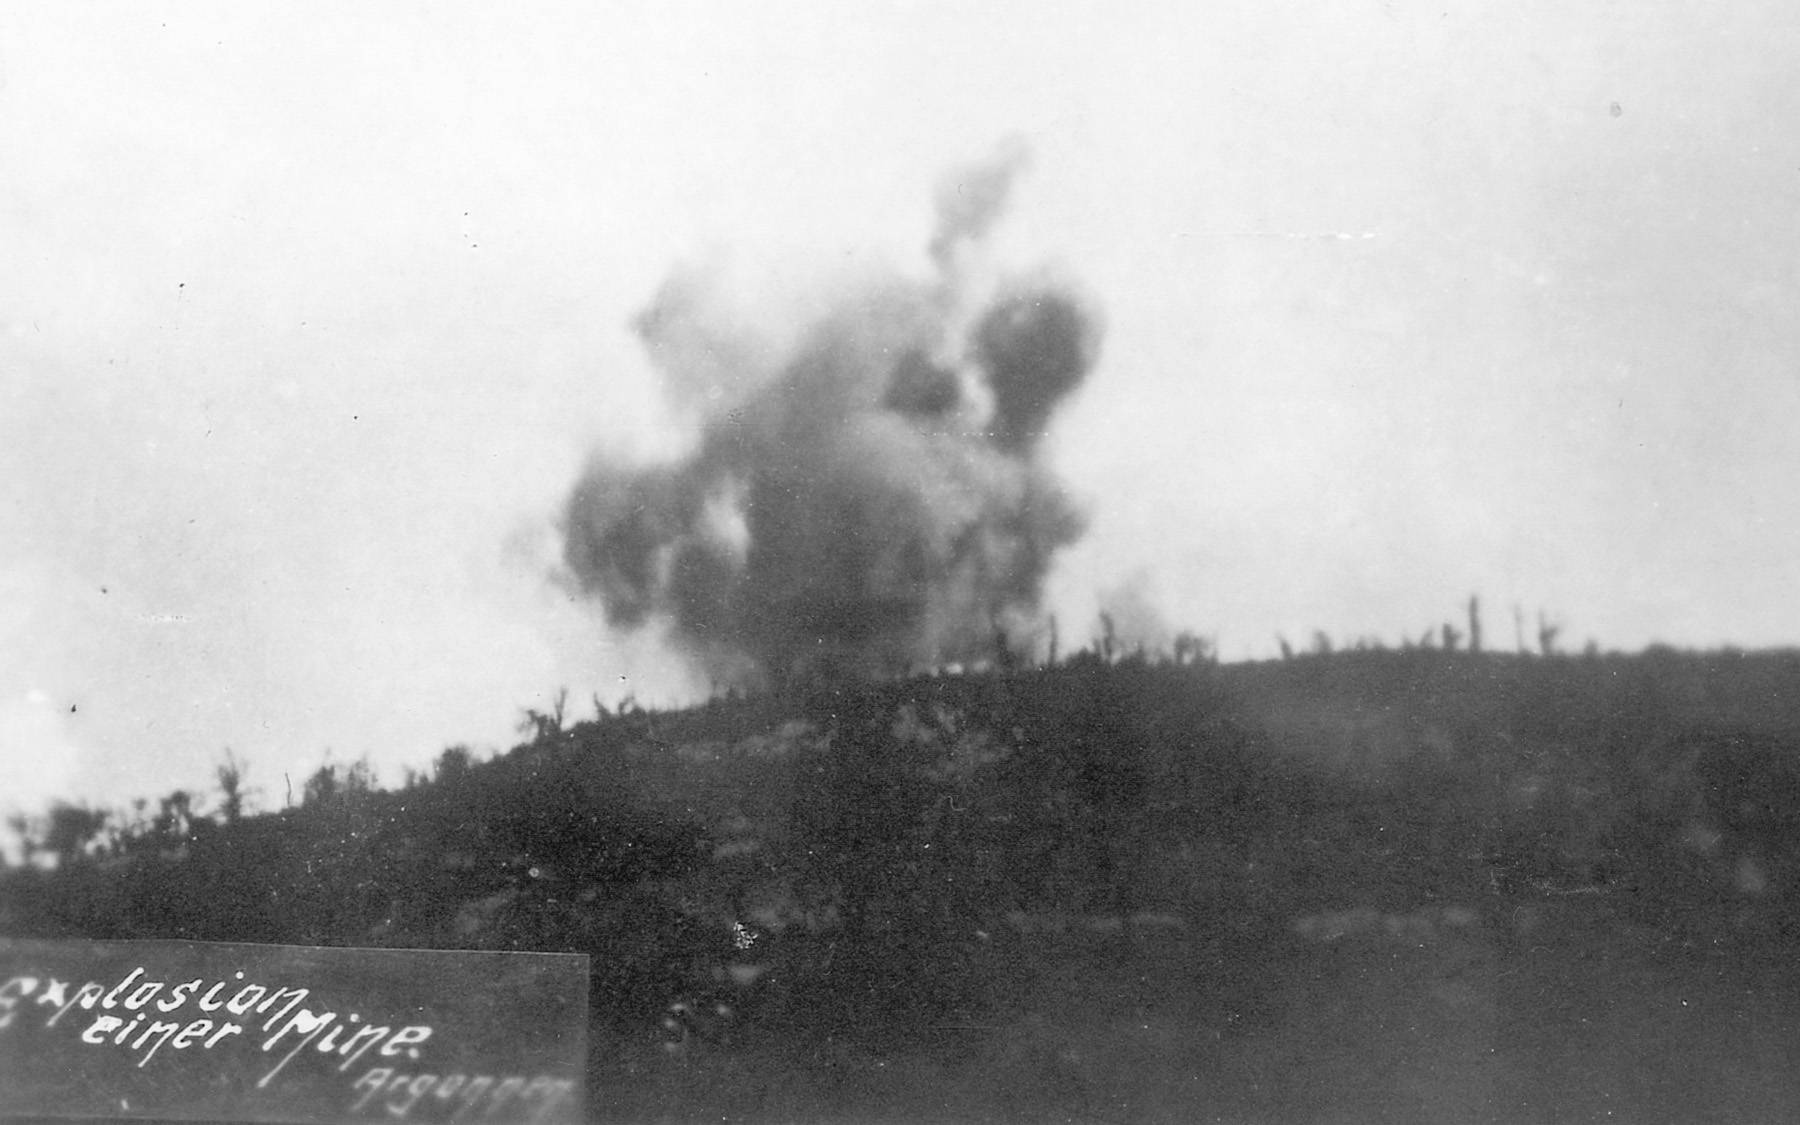 A mine explodes on the Western front.